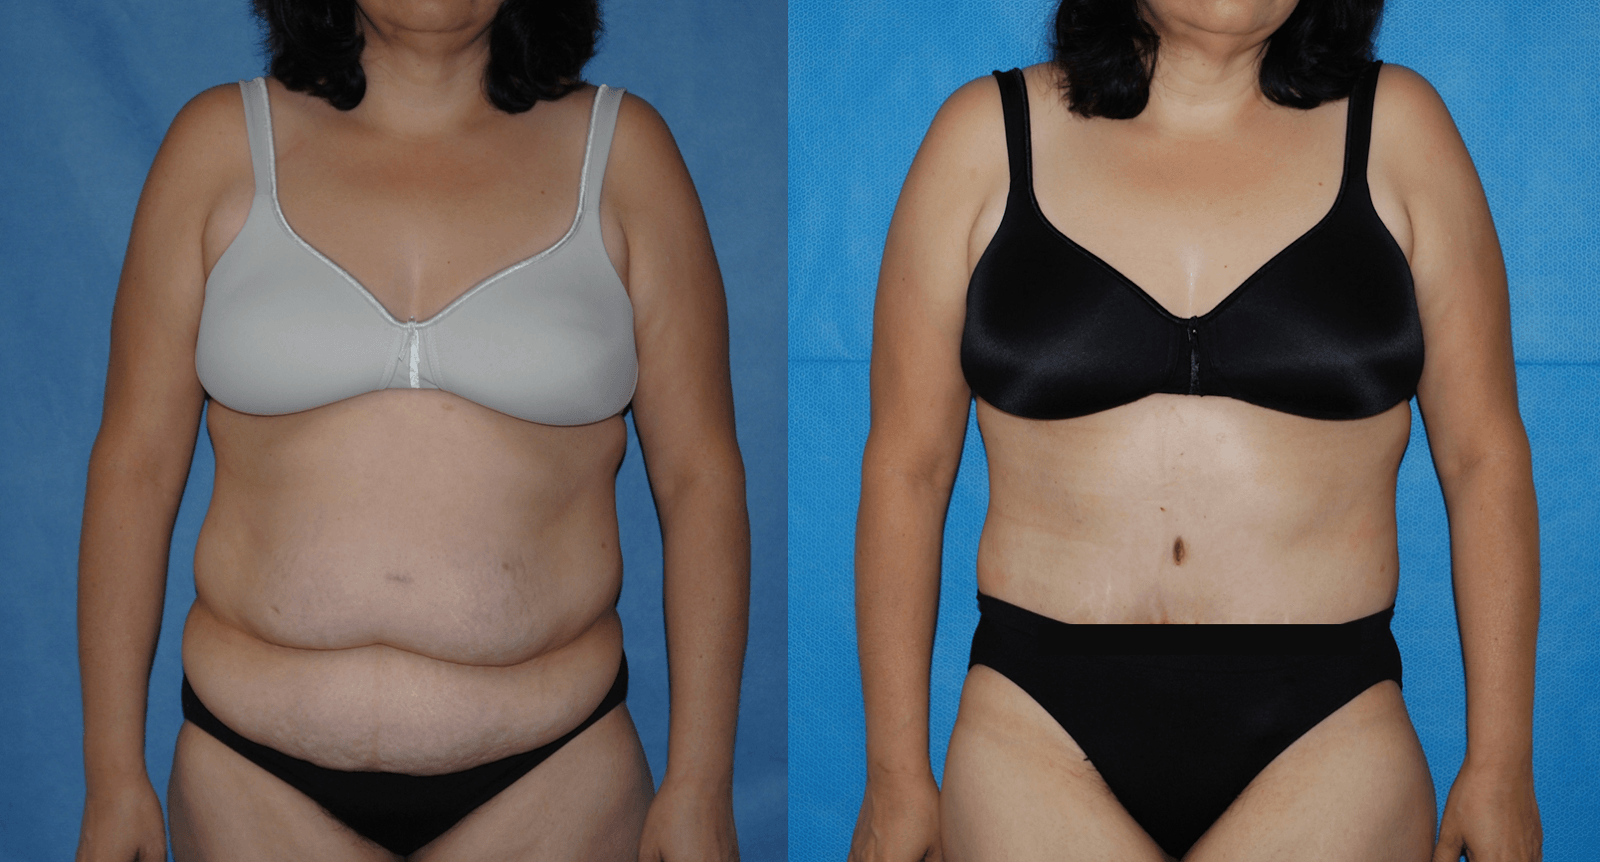 Abdominoplasty in the Weight Loss Surgery Patient